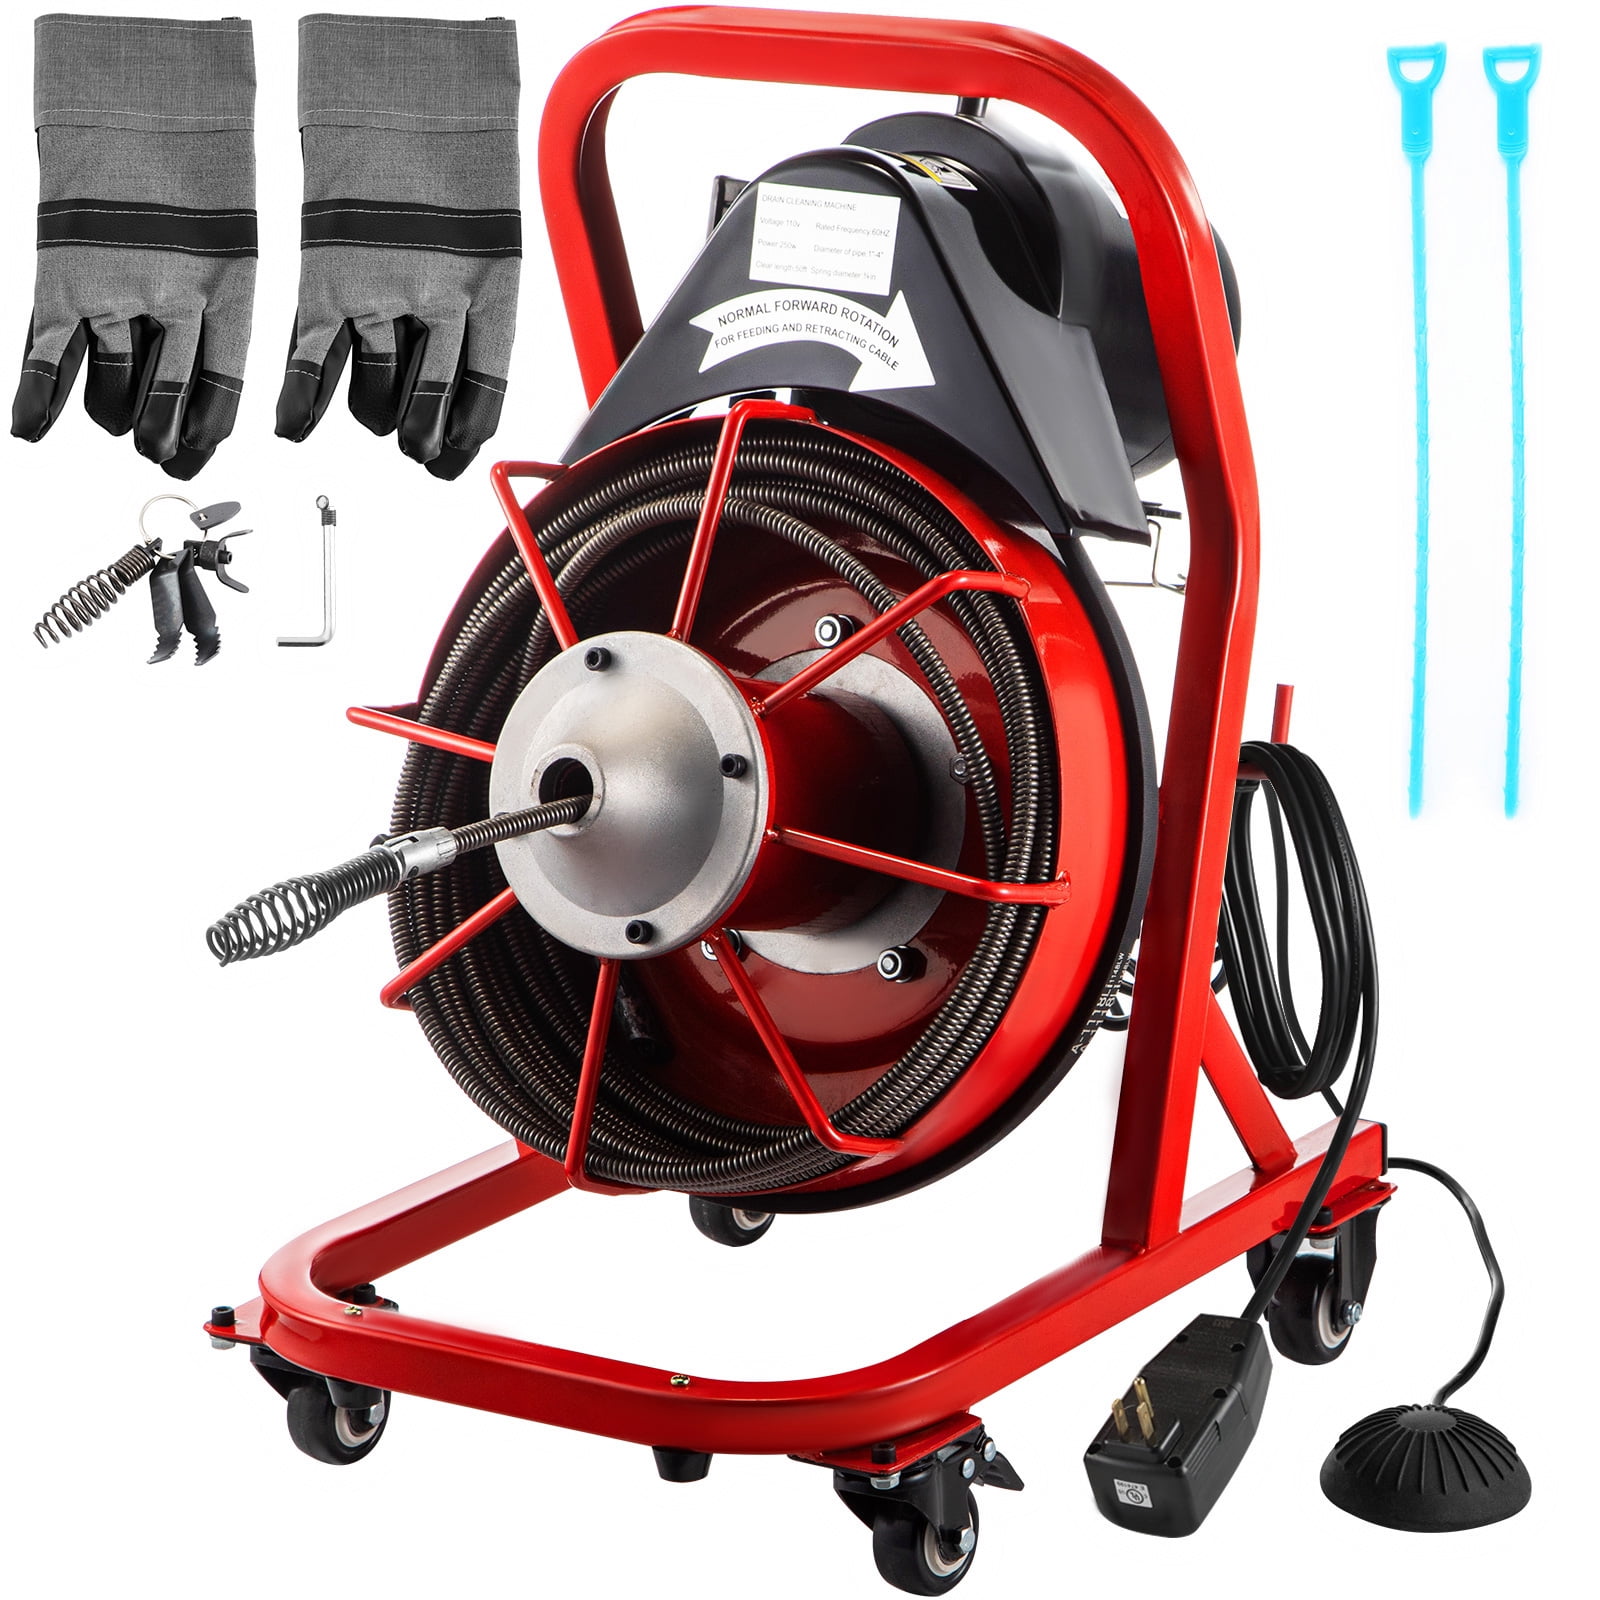 VEVOR Electric Drain Auger Cleaner, 26 ft x 1/3 in Cable Sewer Snake  Machine with Gloves, Portable Plumbing Tool for Unclogging 0.8 to 2.6 inch  Pipes at Sinks/Tubs/Toilets/Kitchen, 700W Red